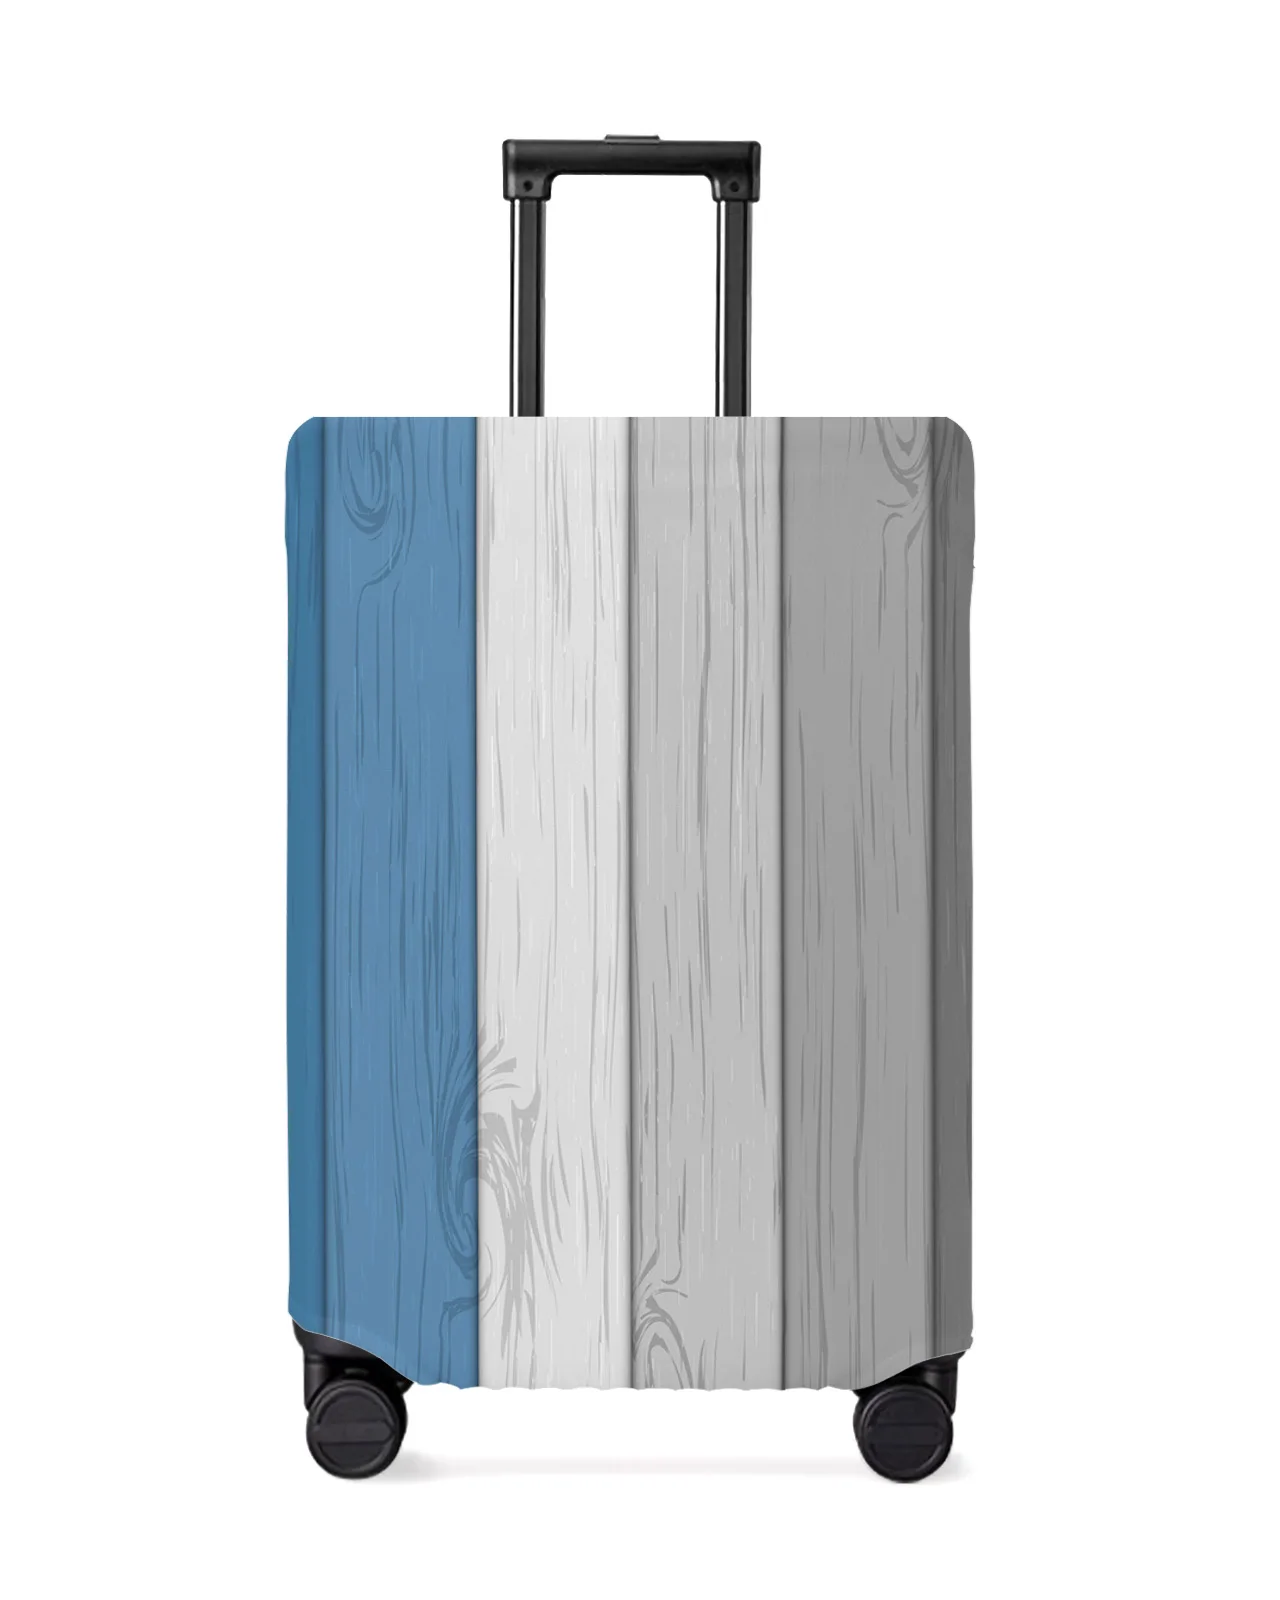 

Retro Blue Grey Gradient Wood Grain Luggage Cover Stretch Baggage Protector Dust Cover for 18-32 Inch Travel Suitcase Case